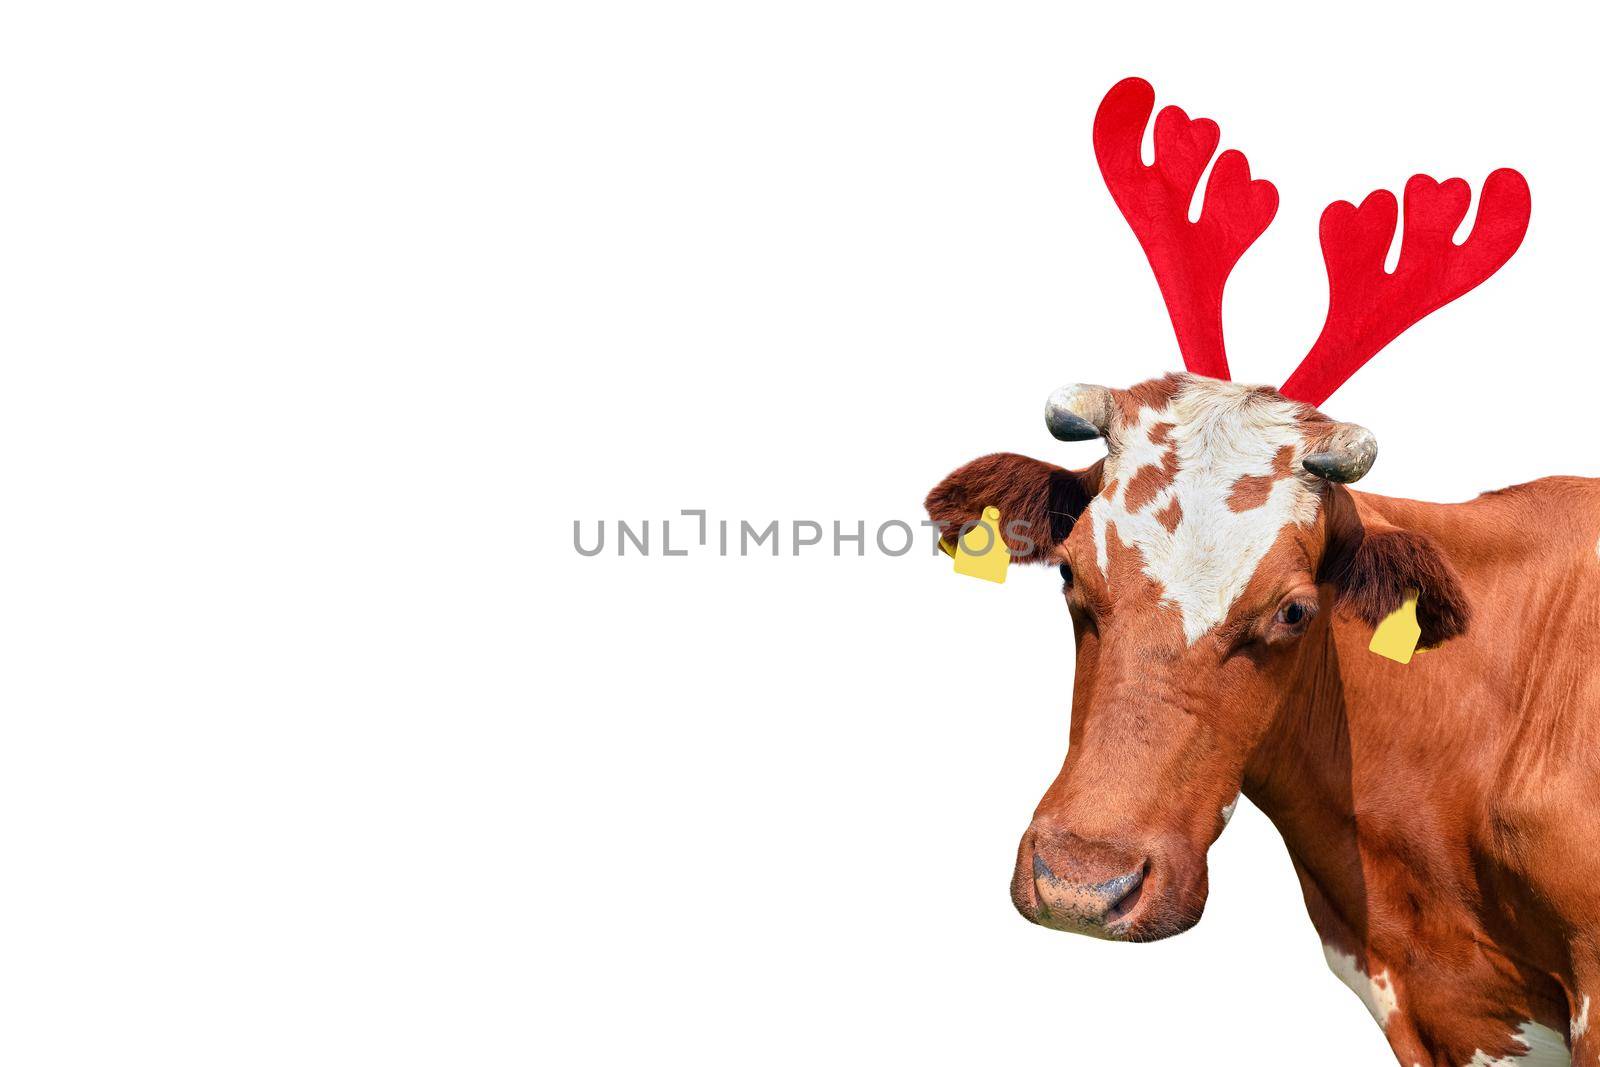 Christmas funny red and white spotted cow isolated on white background. Cow portrait in Christmas Reindeer Antlers Headband